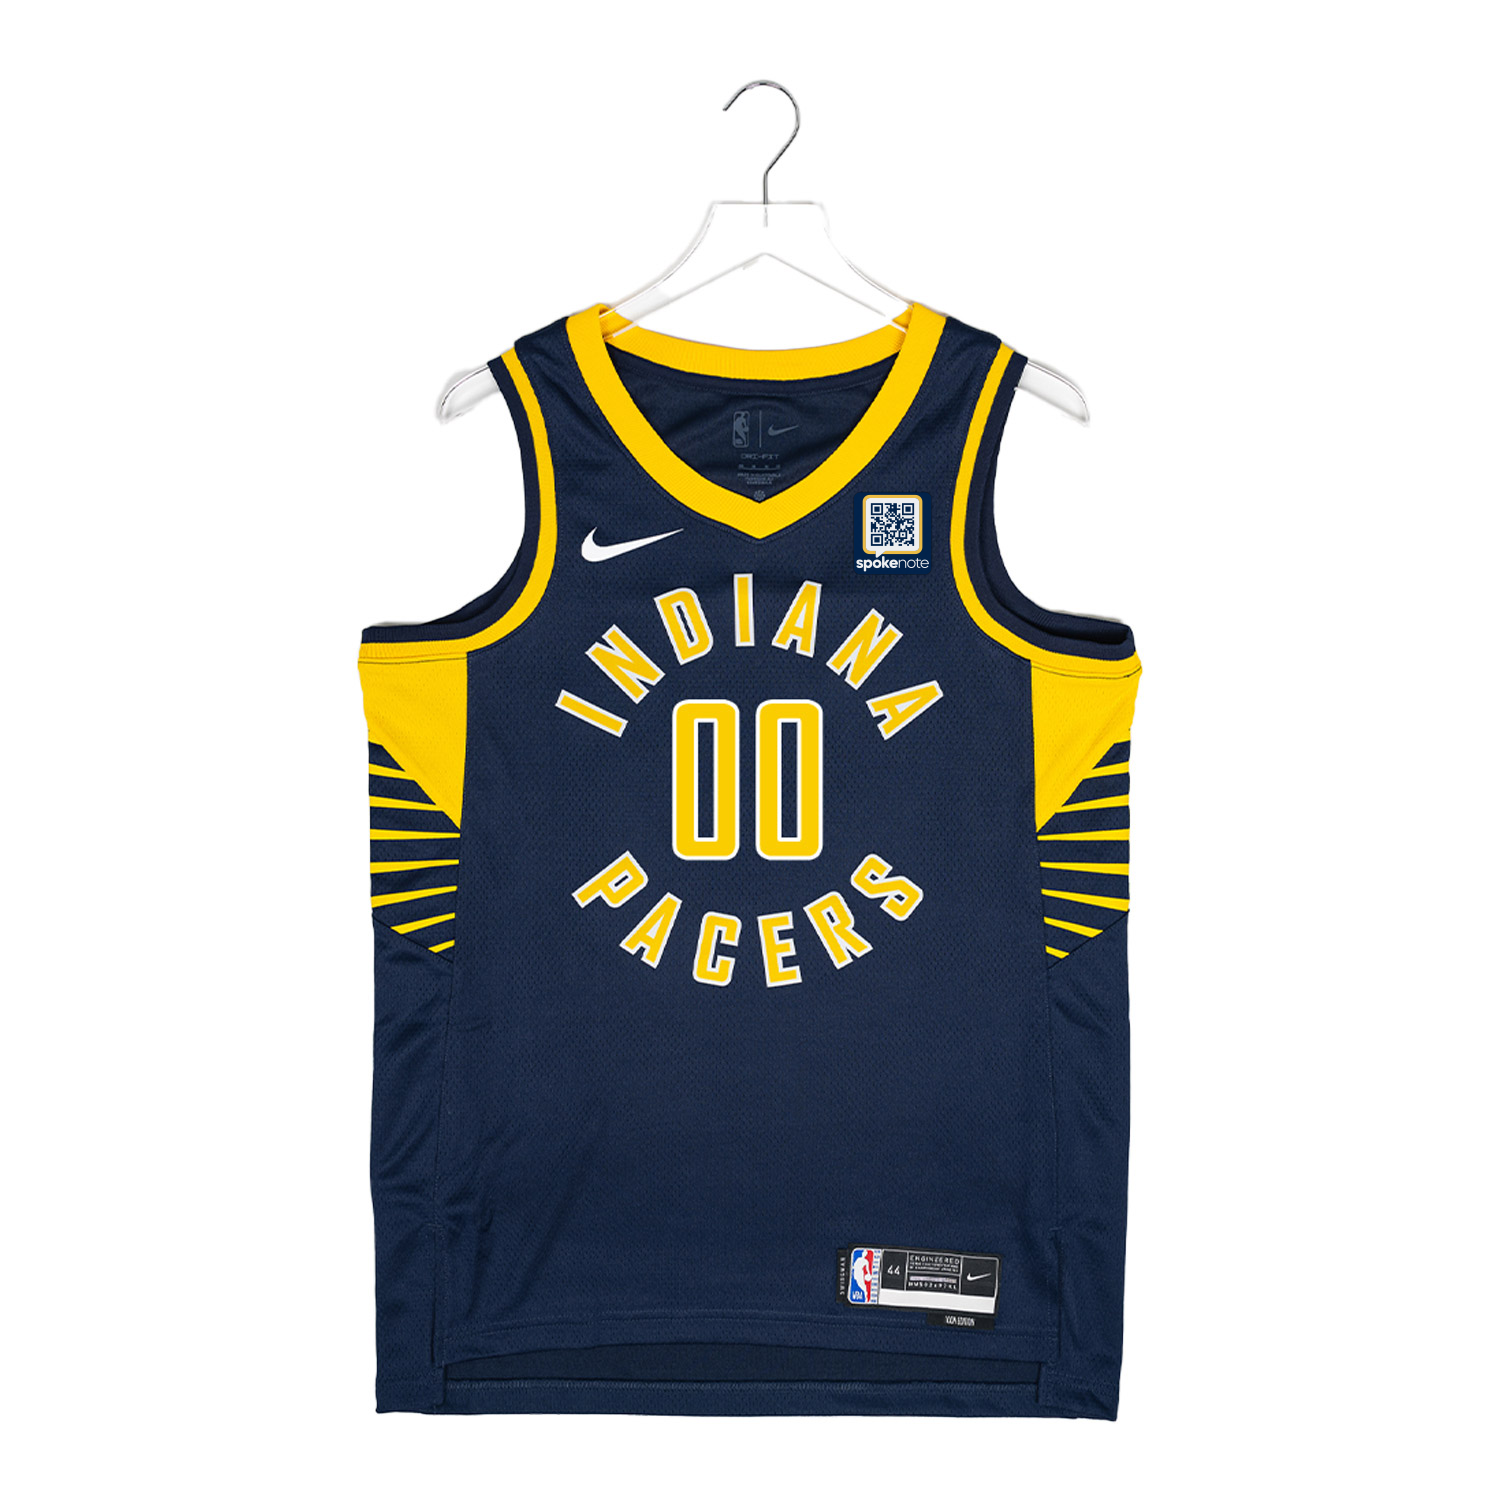 Indiana Pacers All-Star player jersey